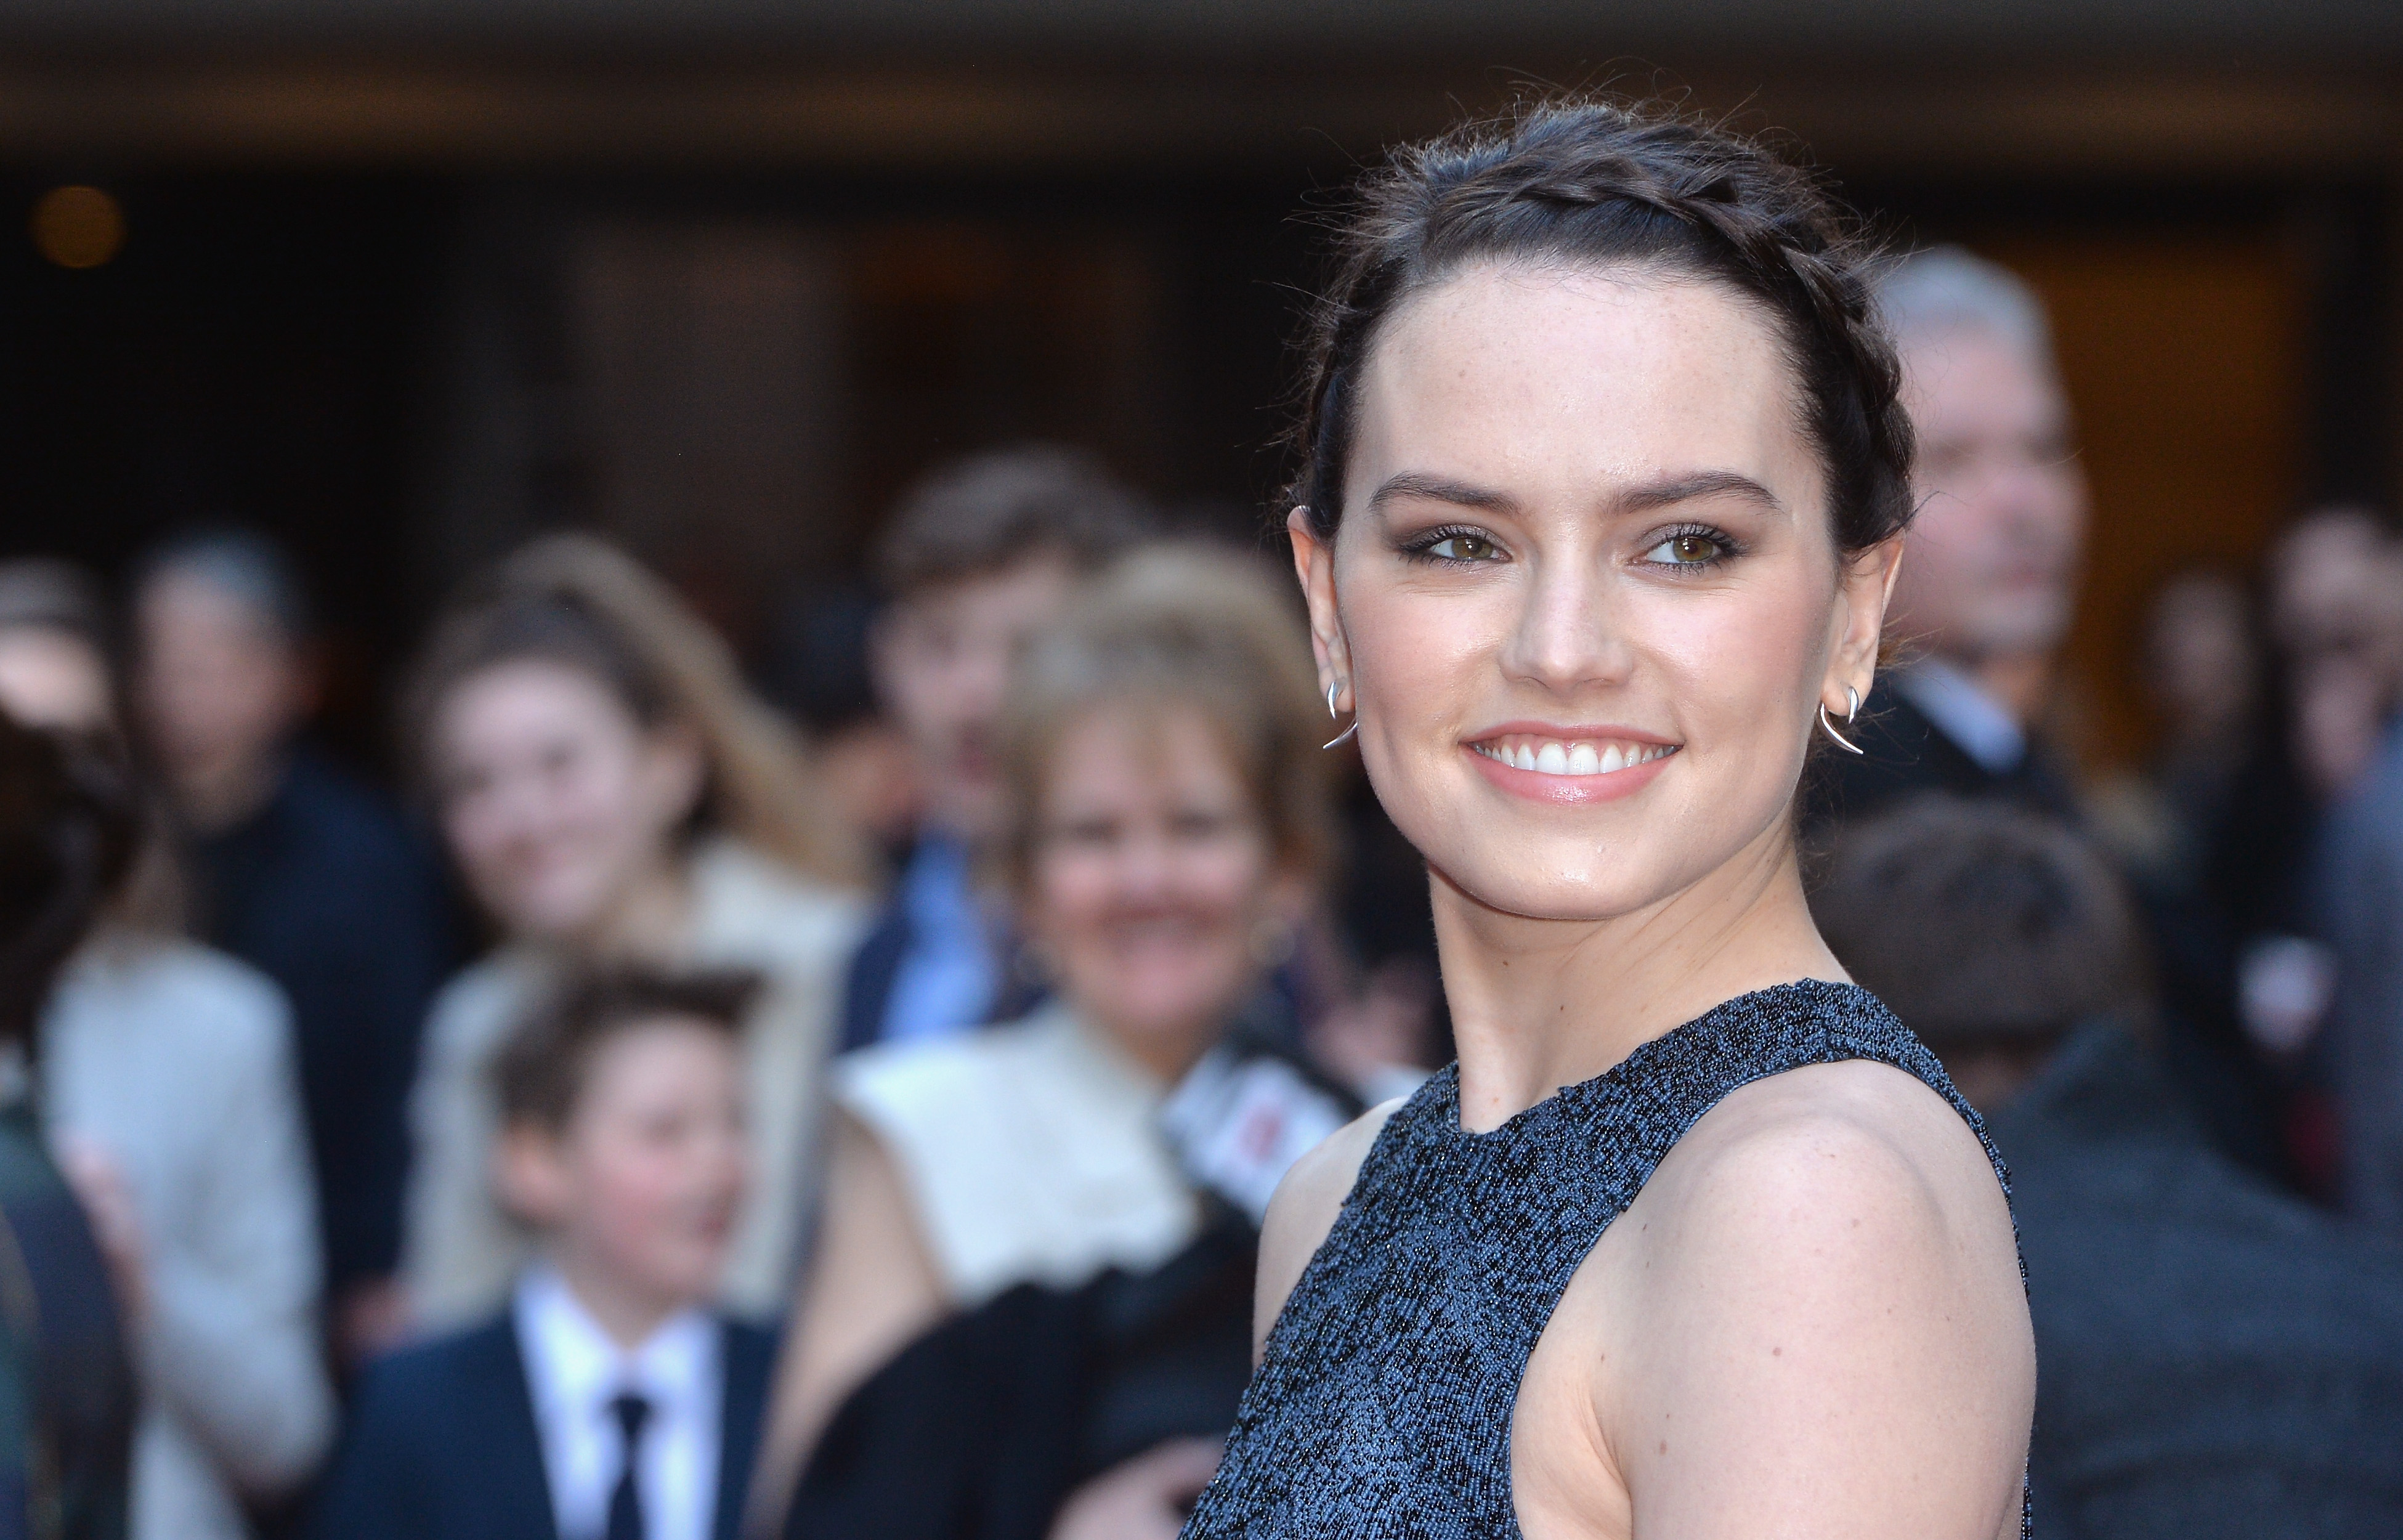 Daisy Ridley attends the Jameson Empire Awards at The Grosvenor House Hotel on March 20, 2016 in London, England. (Anthony Harvey&mdash;Getty Images)